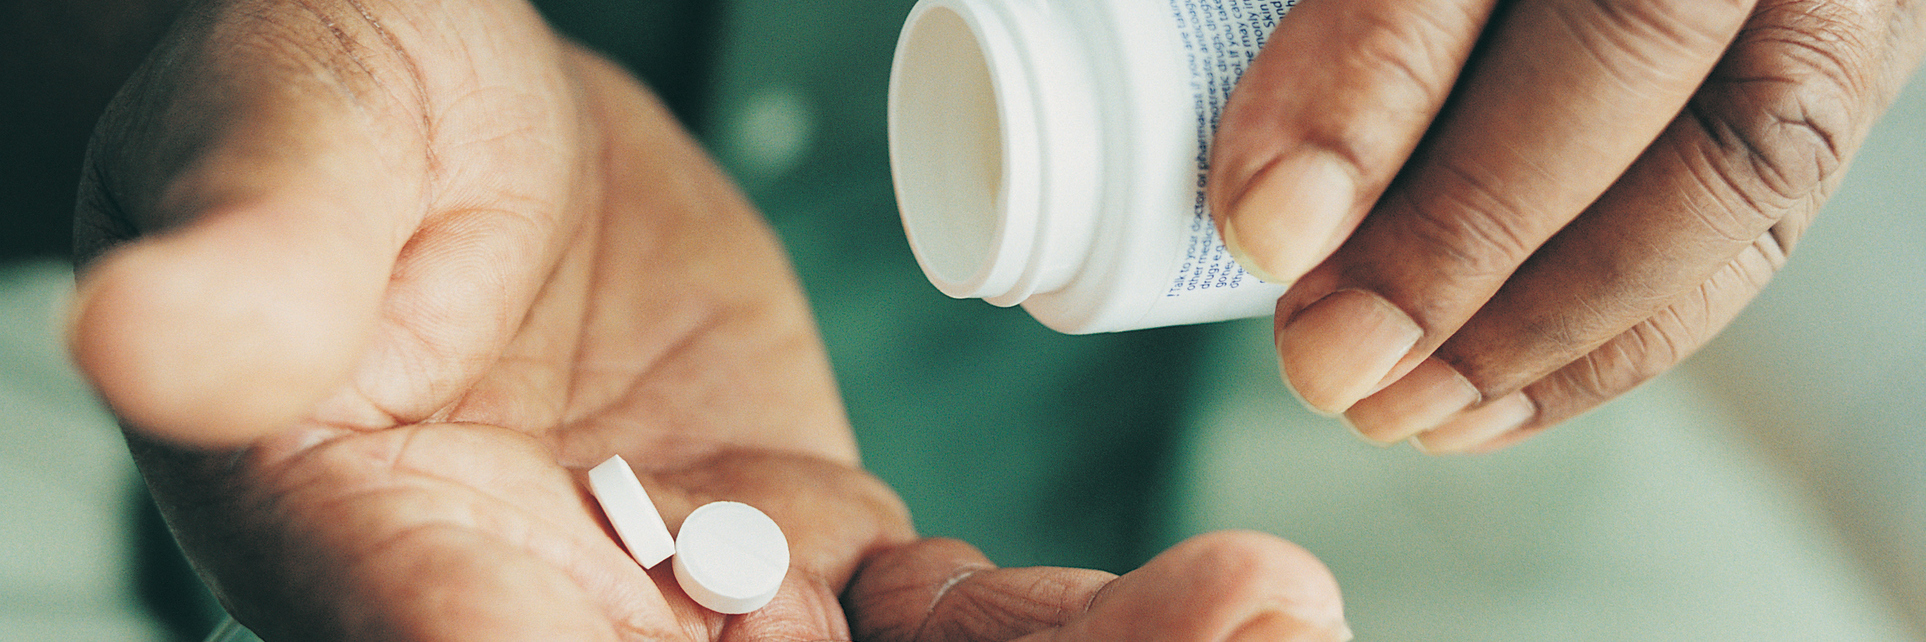 Close-up of someone's hands, tilting a pill bottle with pills in their open palm. 6 Wacky Side Effects of Prednisone Doctors Don't Tell You About